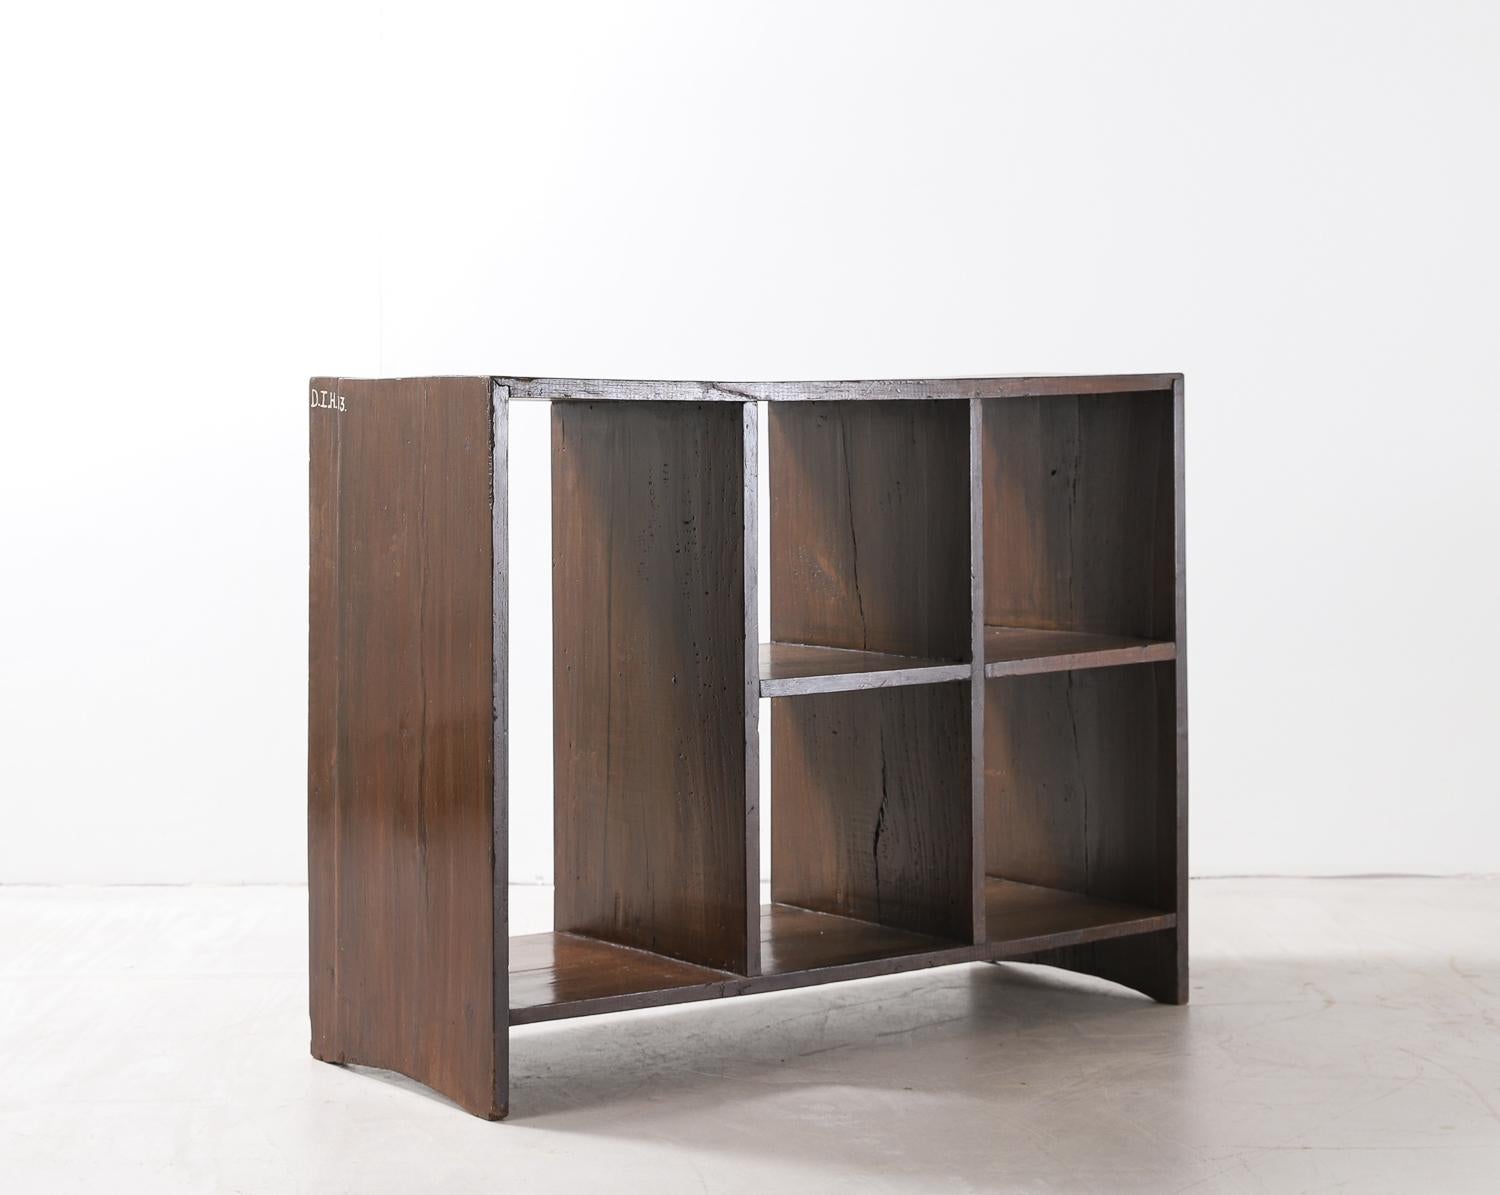 Indian Pierre Jeanneret, “File Rack” Double Sided Storage Unit, circa 1957-1958